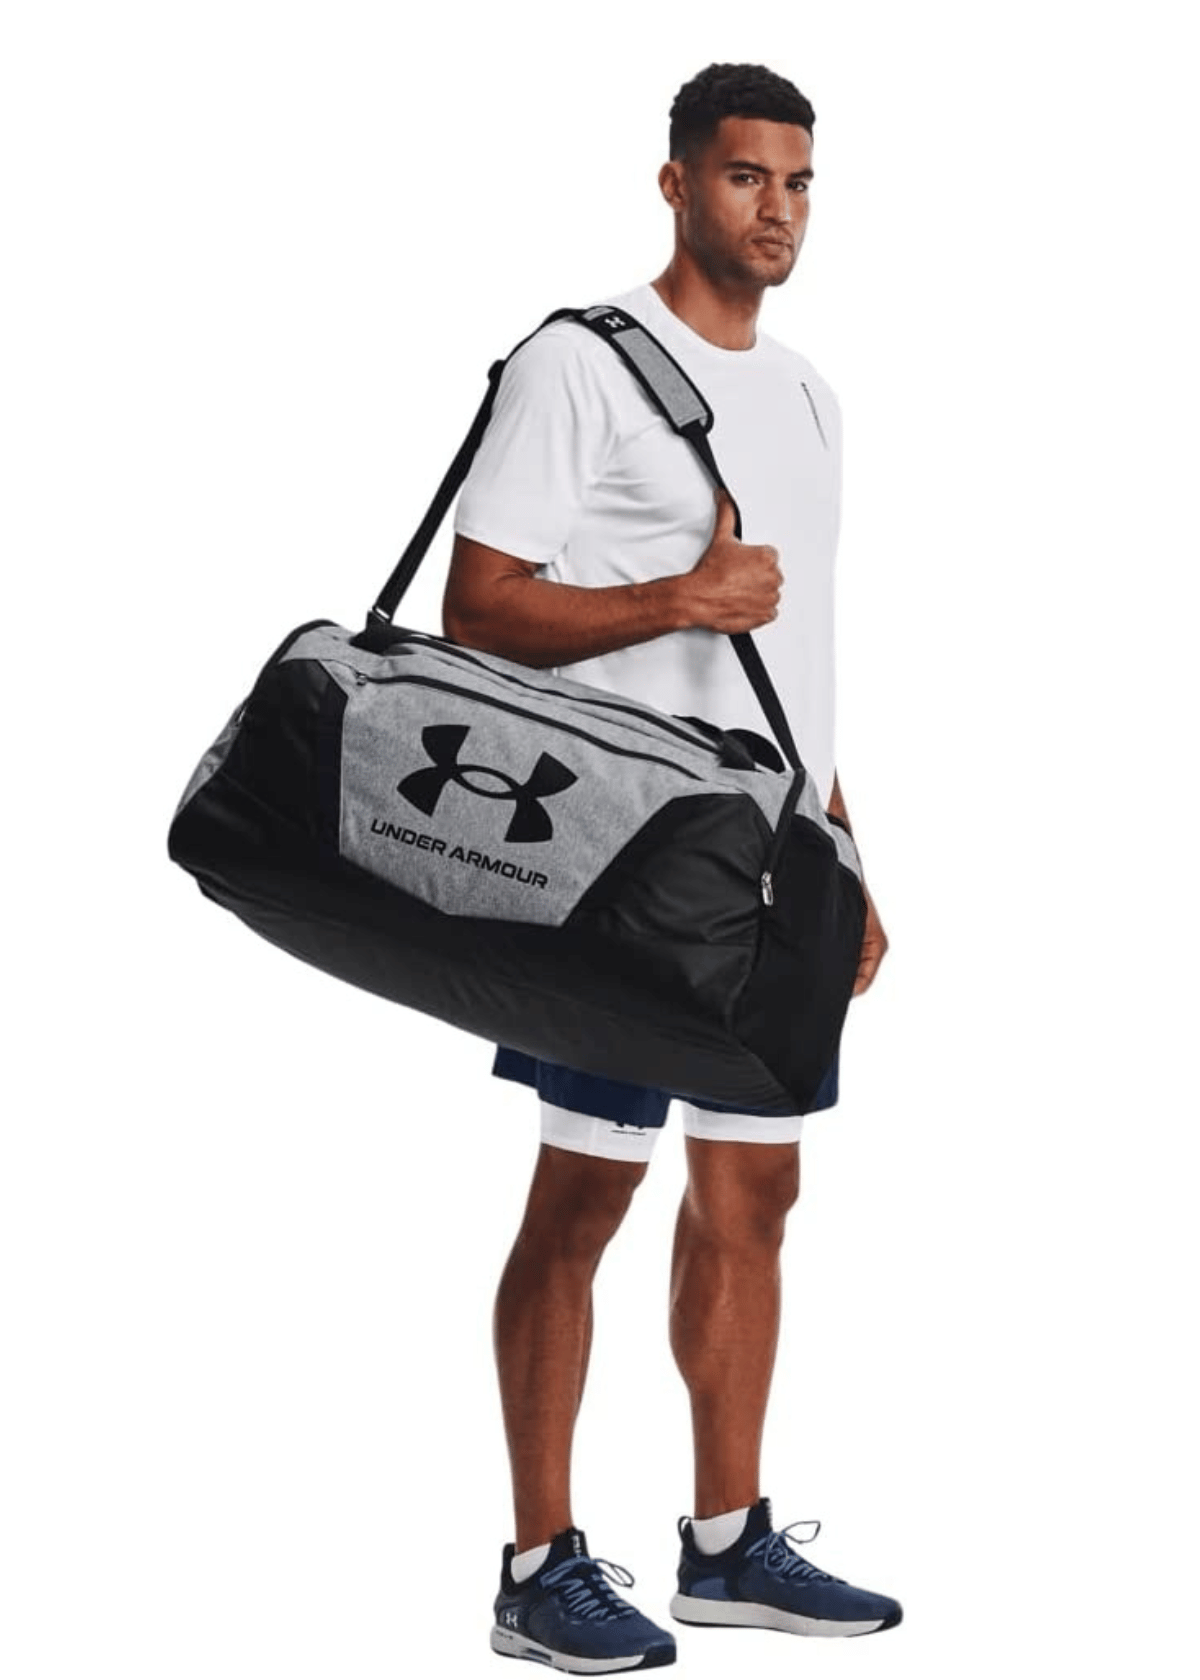 The Best Soccer Duffle Bag: Our Top Picks